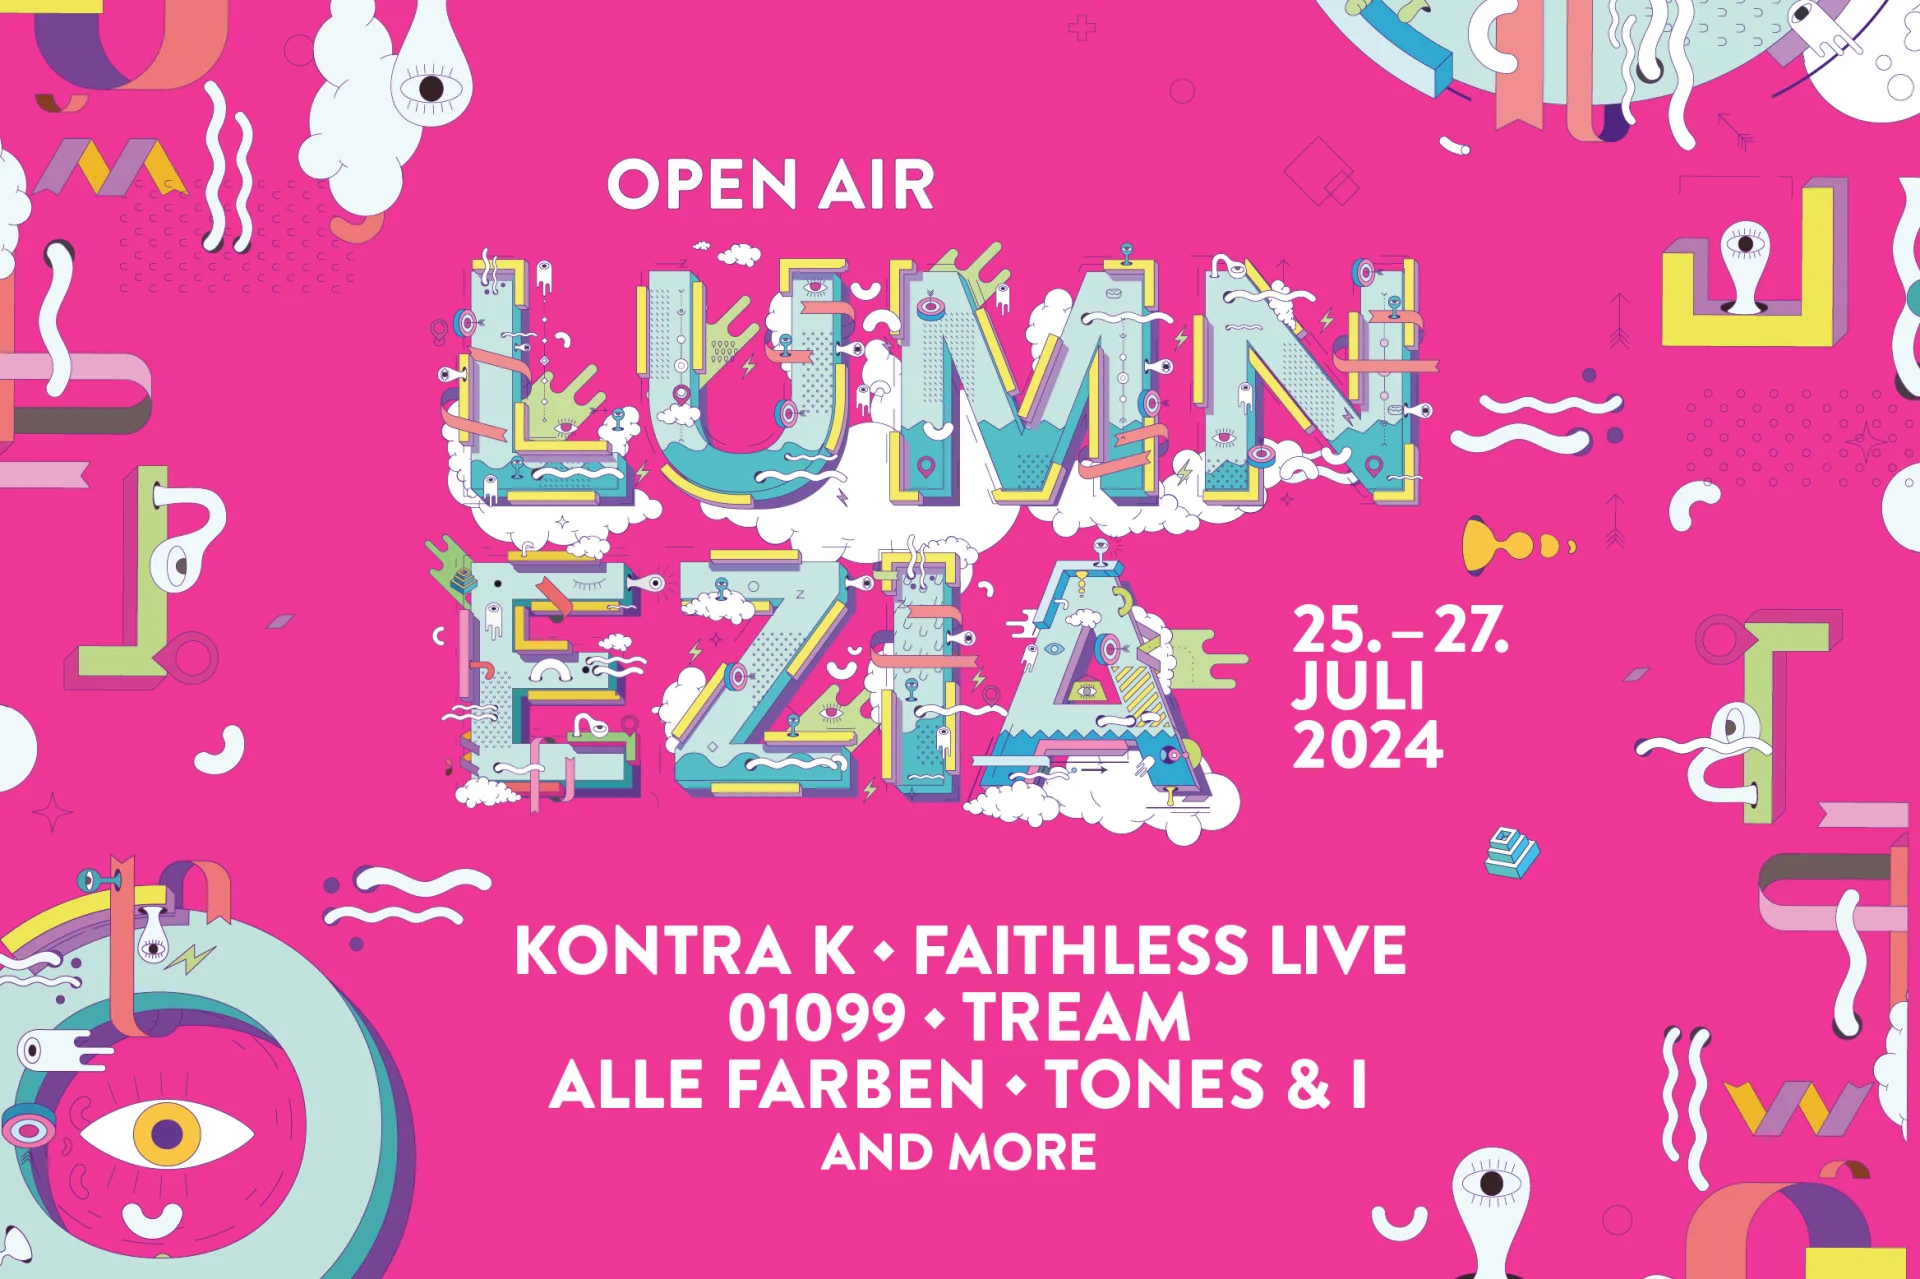 Illustration with the dates and program of the Open Air Lumnezia